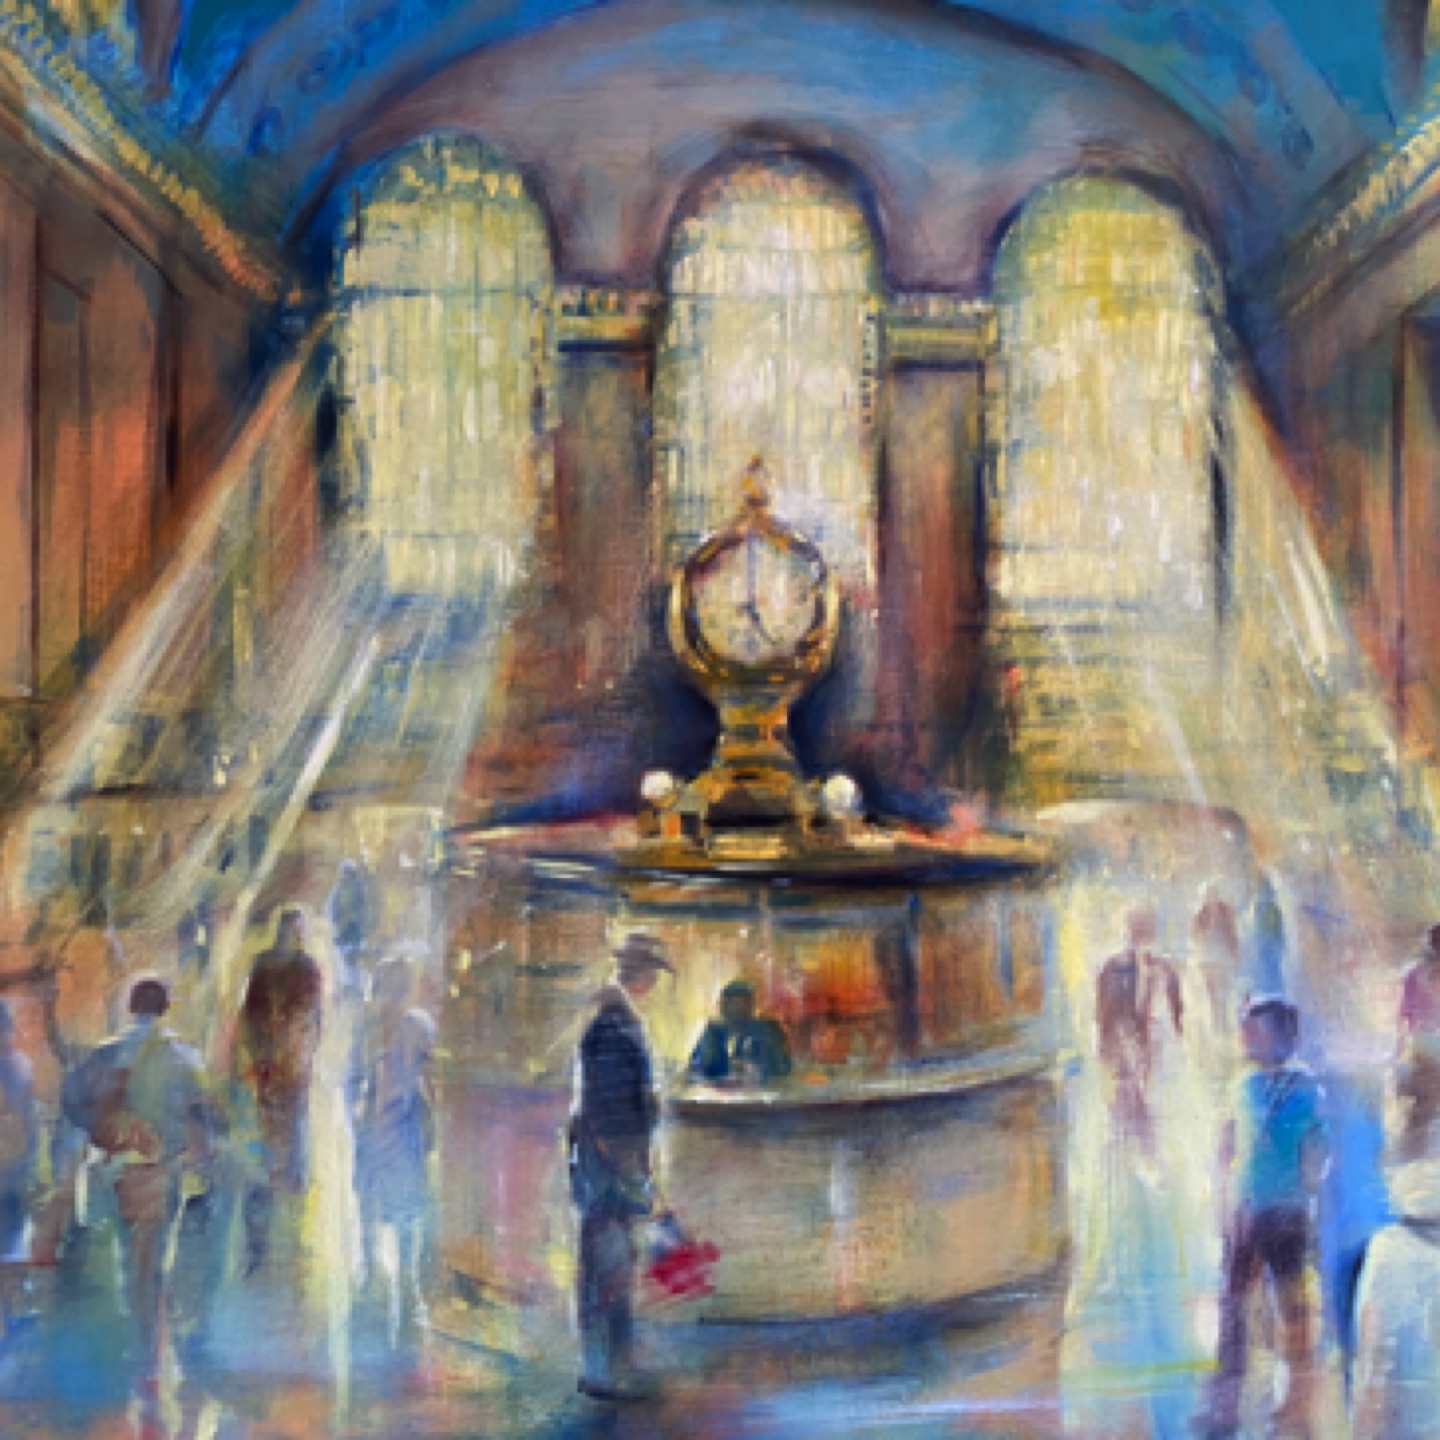 Gregg Chadwick
The Still Point - Grand Central
30"x40"oil on linen 2020
Private Collection, New York City 
Commissioned April 2020